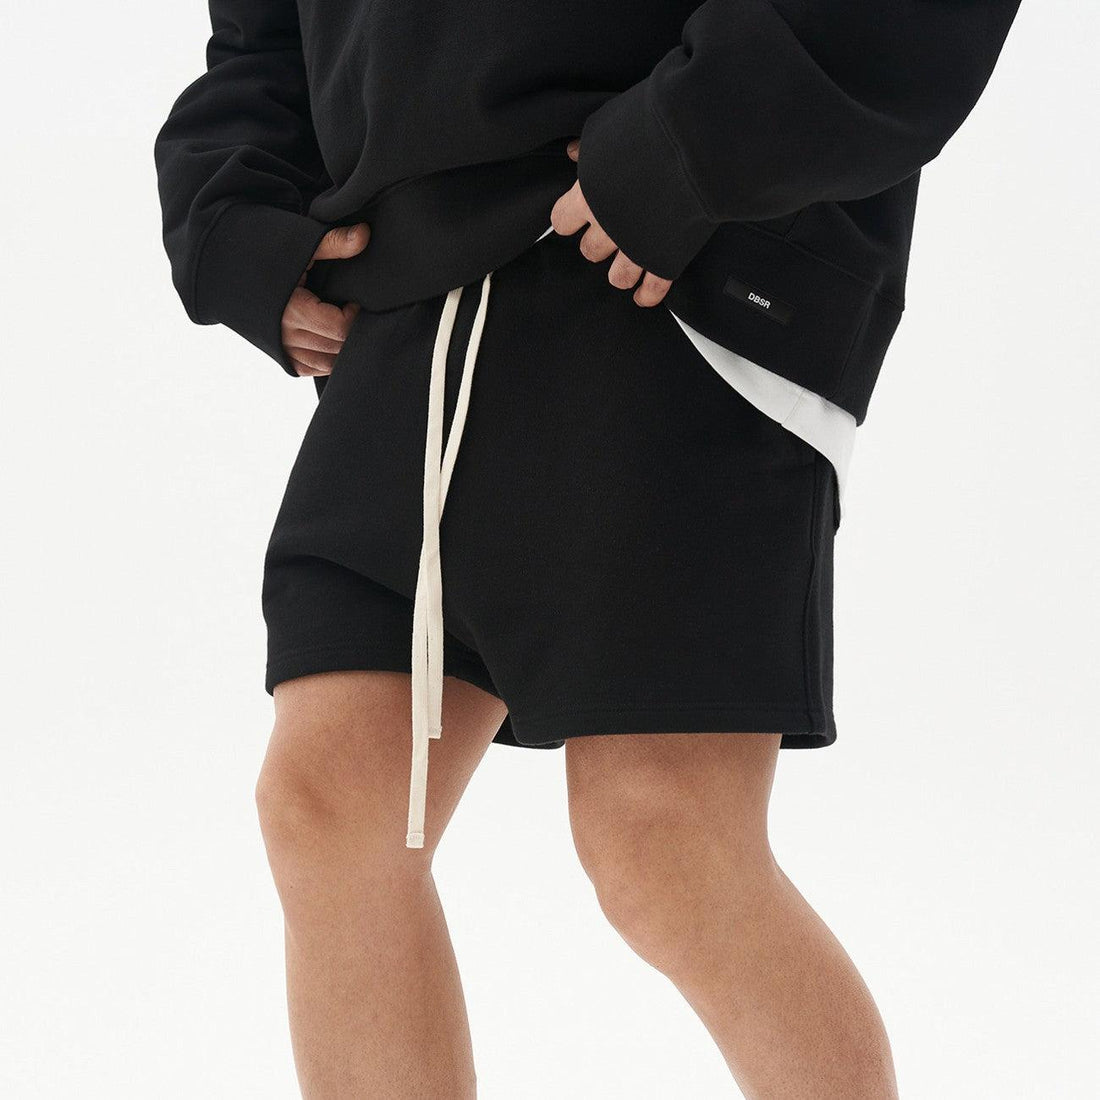 Youth Trend Sports High Street Shorts - Fashion - Your-Look